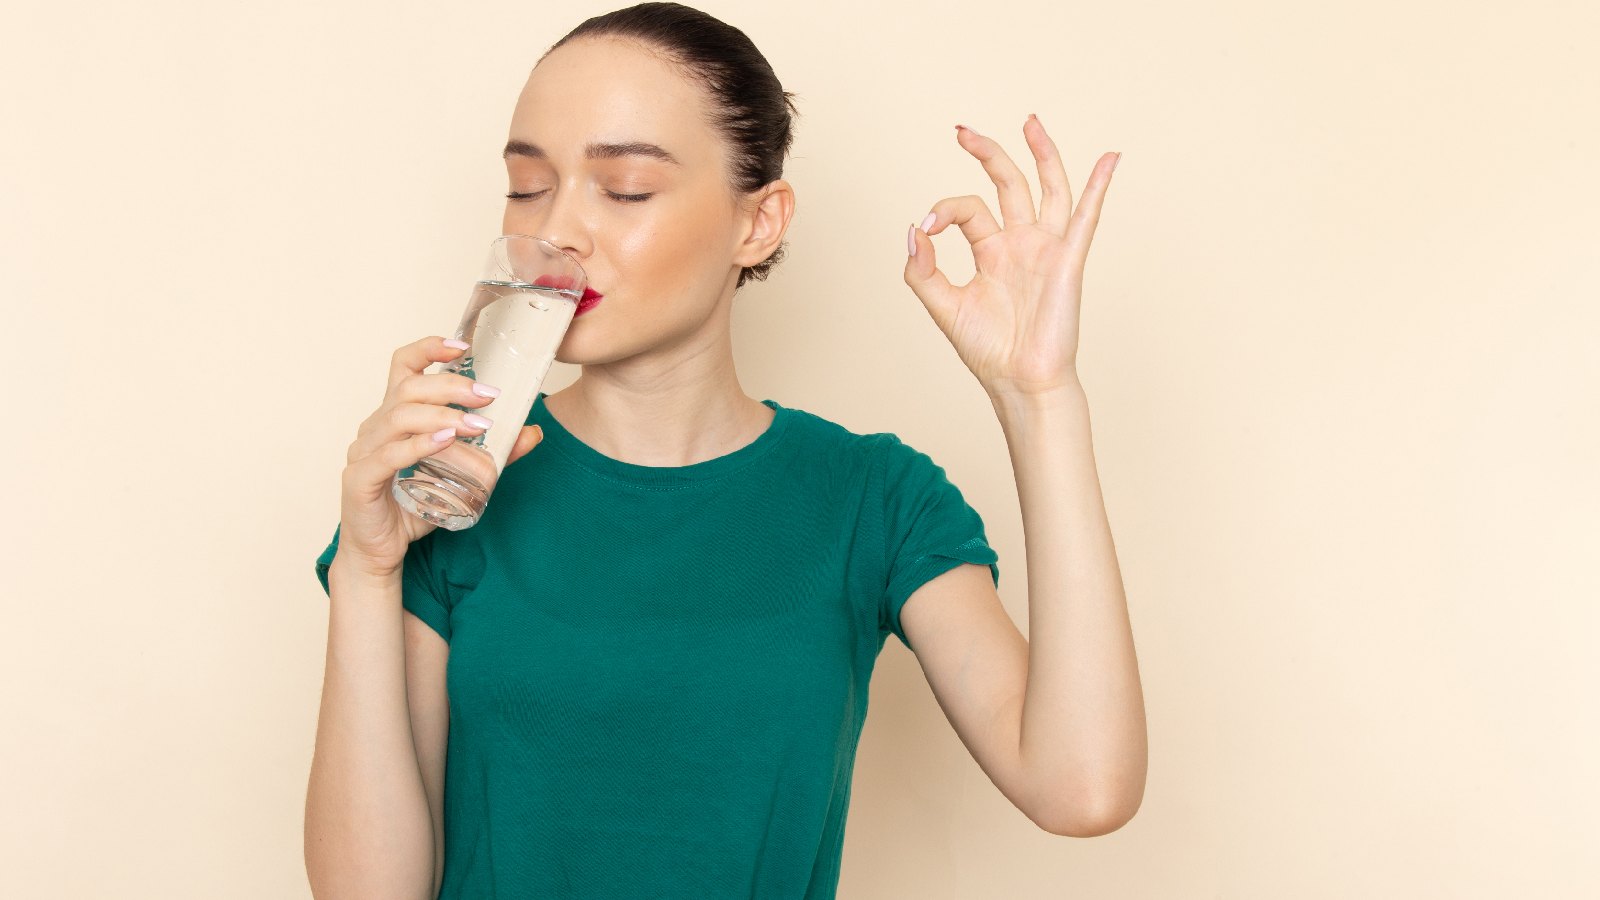 Drinking enough water? 5 ways to know if you are hydrated